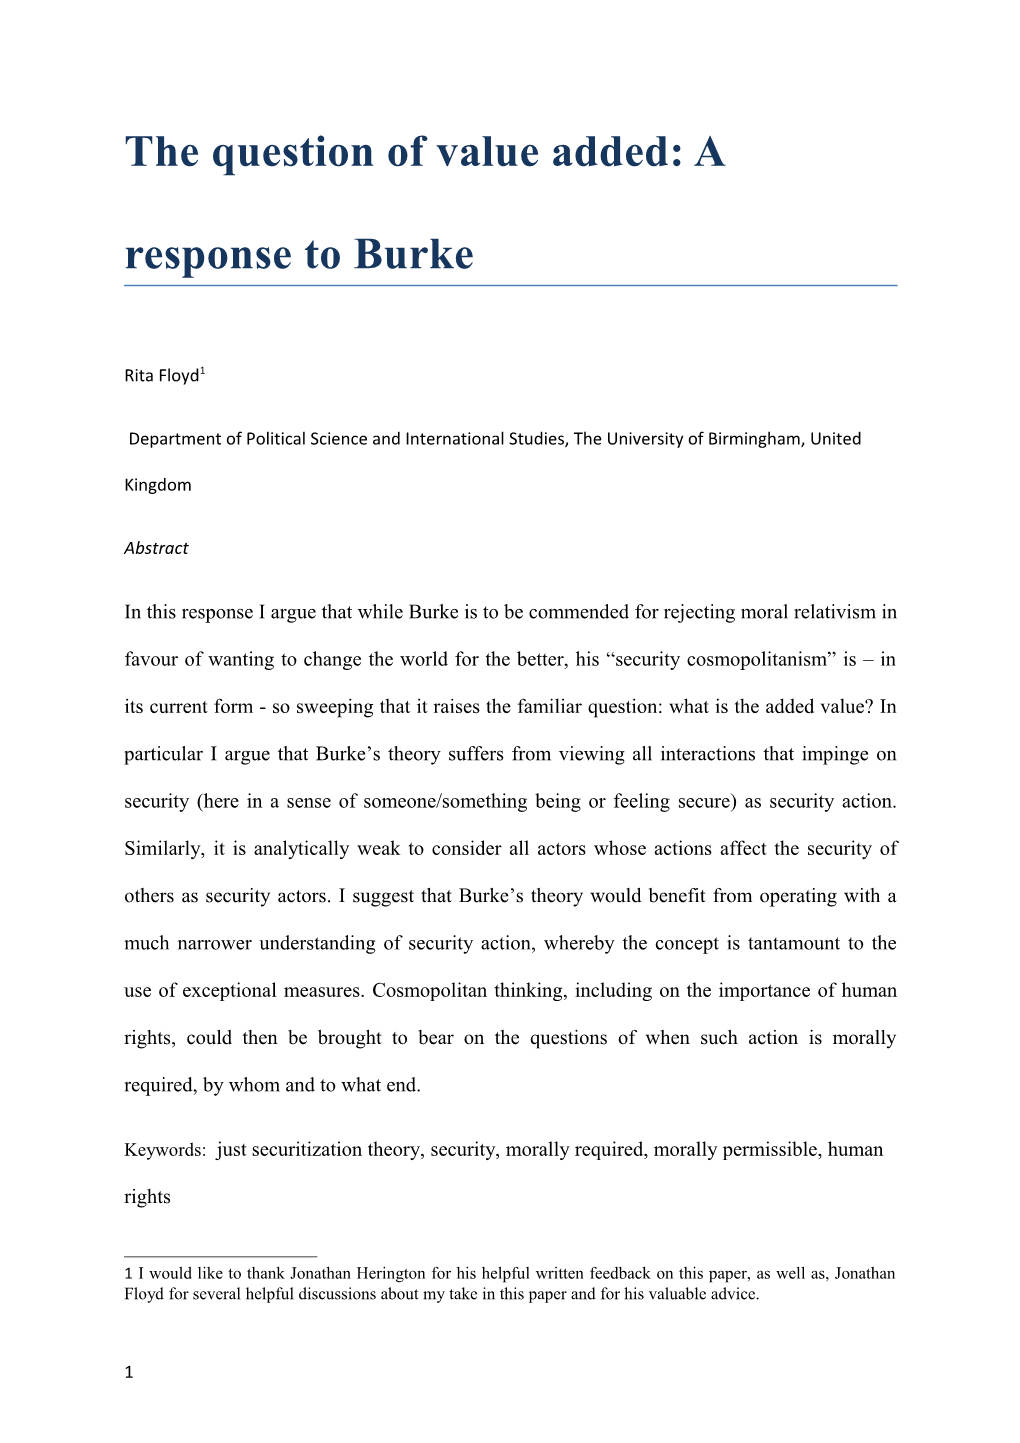 The Question of Value Added: a Responseto Burke